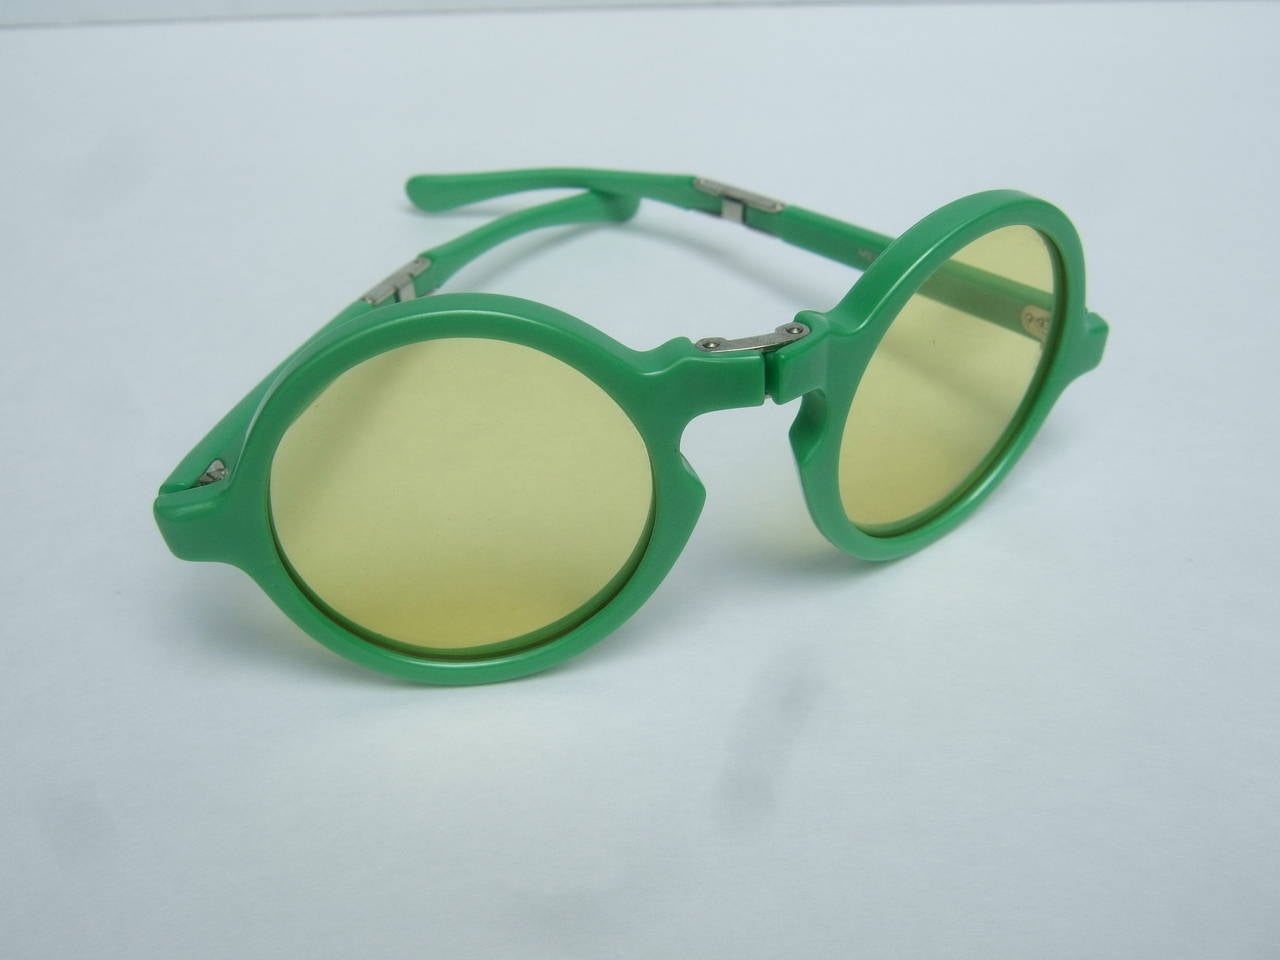 Avant-garde Italian green tinted sunglasses designed by Tuttifrutti Italy c 1960s

The mod retro sunglasses have a innovative unique design. The apple green 
lucite frames are designed with hinges. The frames fold to be stored in the
original